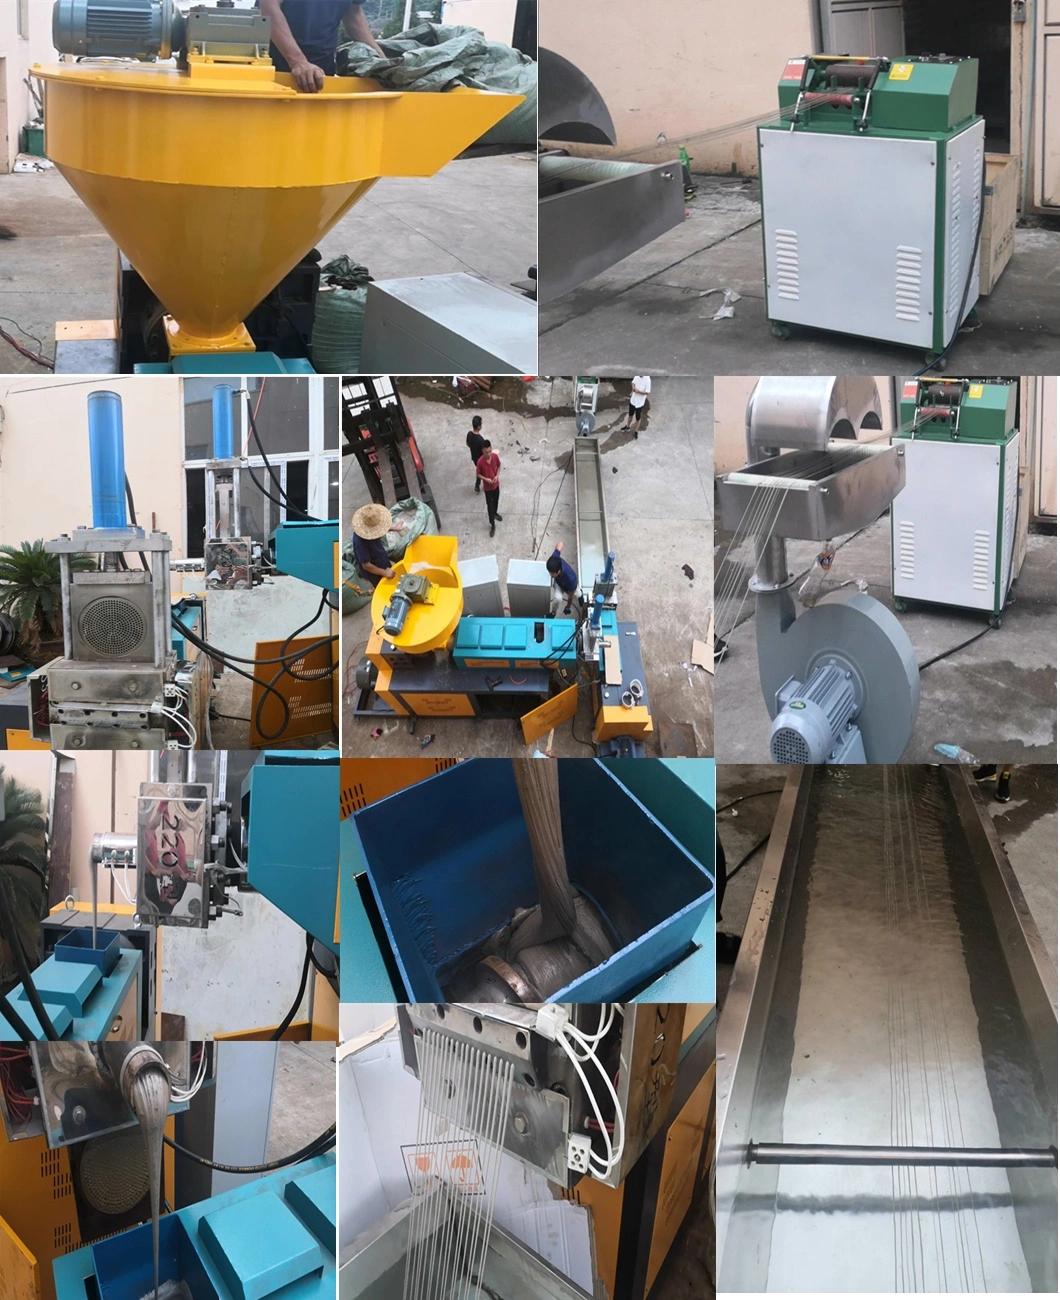 Hengtuo Waste Plastic Film Recycling Squeezer Dewatering Machinery